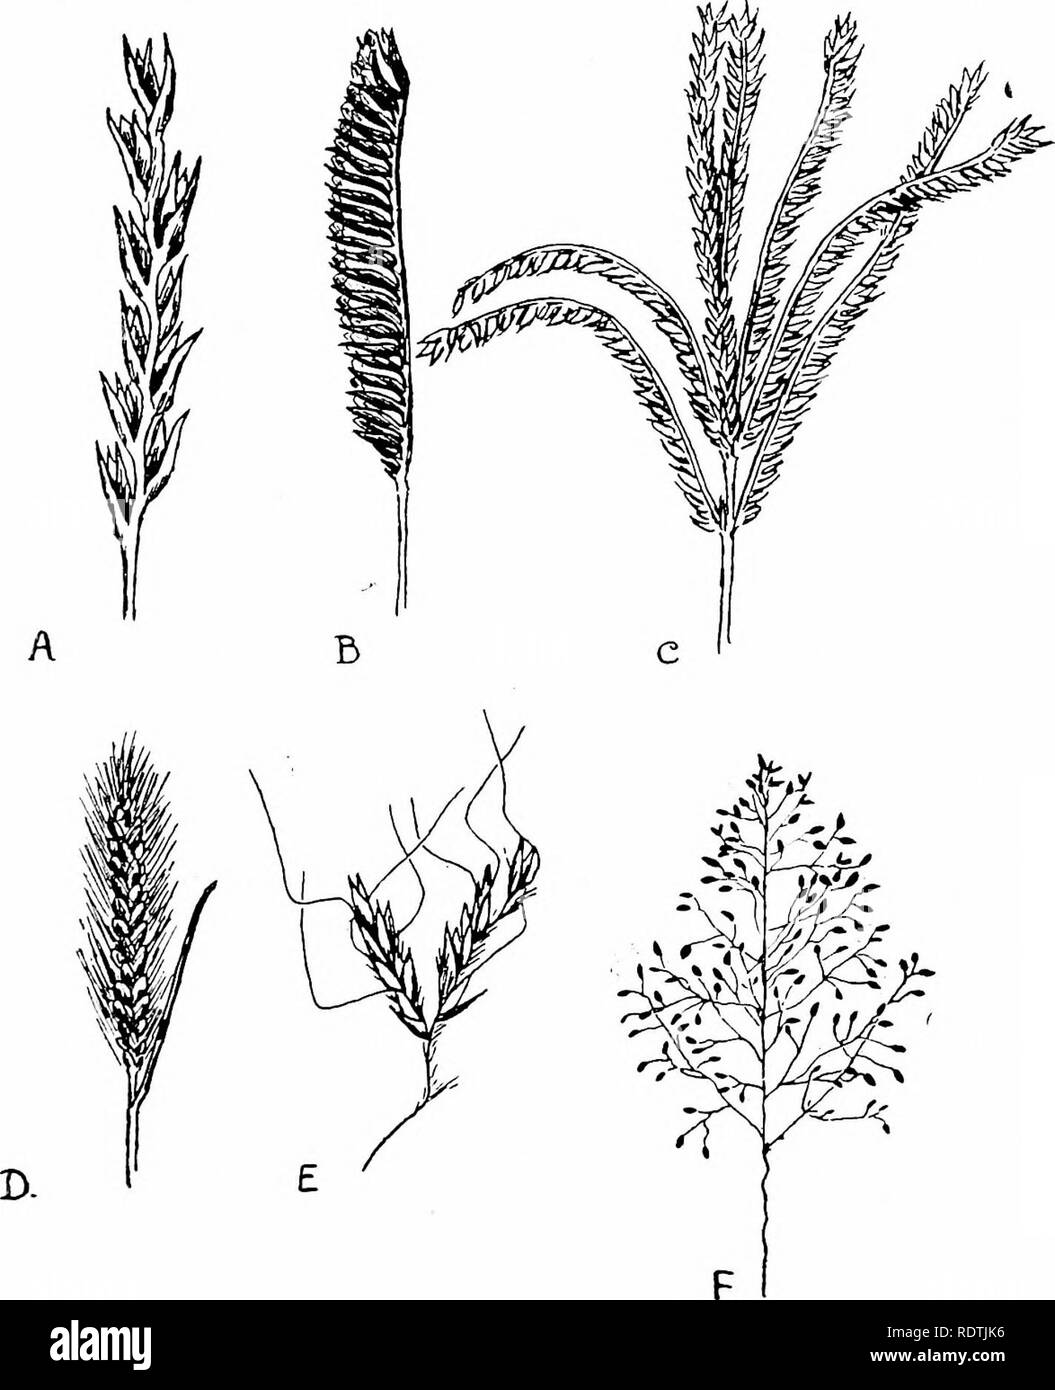 . The grasses and grasslands of South Africa. Botany; Grasses. The leaves are arranged alternately in two rows (2 ranked) and when perfect consist of (1) a sheath with its margins over- lajjping or grown together surrounding the culm, (2) a blade, and (3) a ligulc, which is placed transversely at the inside of the junction of the sheath and blade.. Fig. 2.—Forms of iiifloriscence, A. Oropetlum capeiise, a portion of a .simple spike. B. Harpeehloa capensii, a single se^iind spike. O. Eleusine indica,. secund spikes. D. Set'ina perennis, a panicle (false spike). E Andropogon hirtuSy a single pai Stock Photo